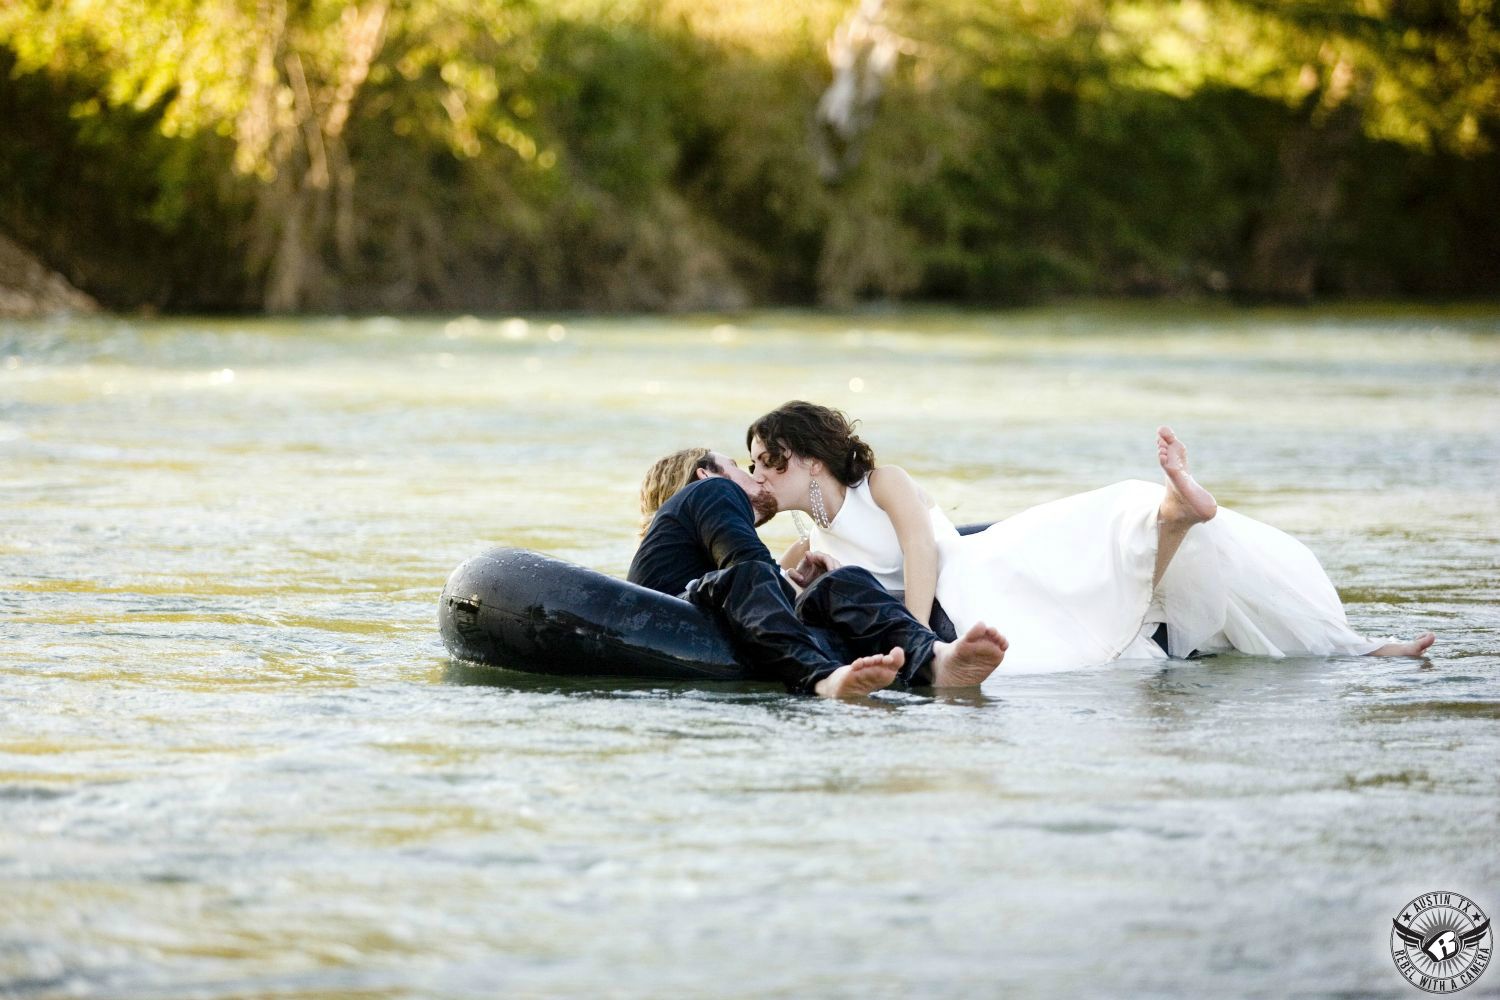 Dark haired girl wears mother wedding dress barefoot floating down the river in a tube kissing a blond guy wearing a tux shirt and black pants also barefoot and also in an inner tube on the Guadalupe River with green trees in the background in this lighthearted summer engagement picture near Bastrop  